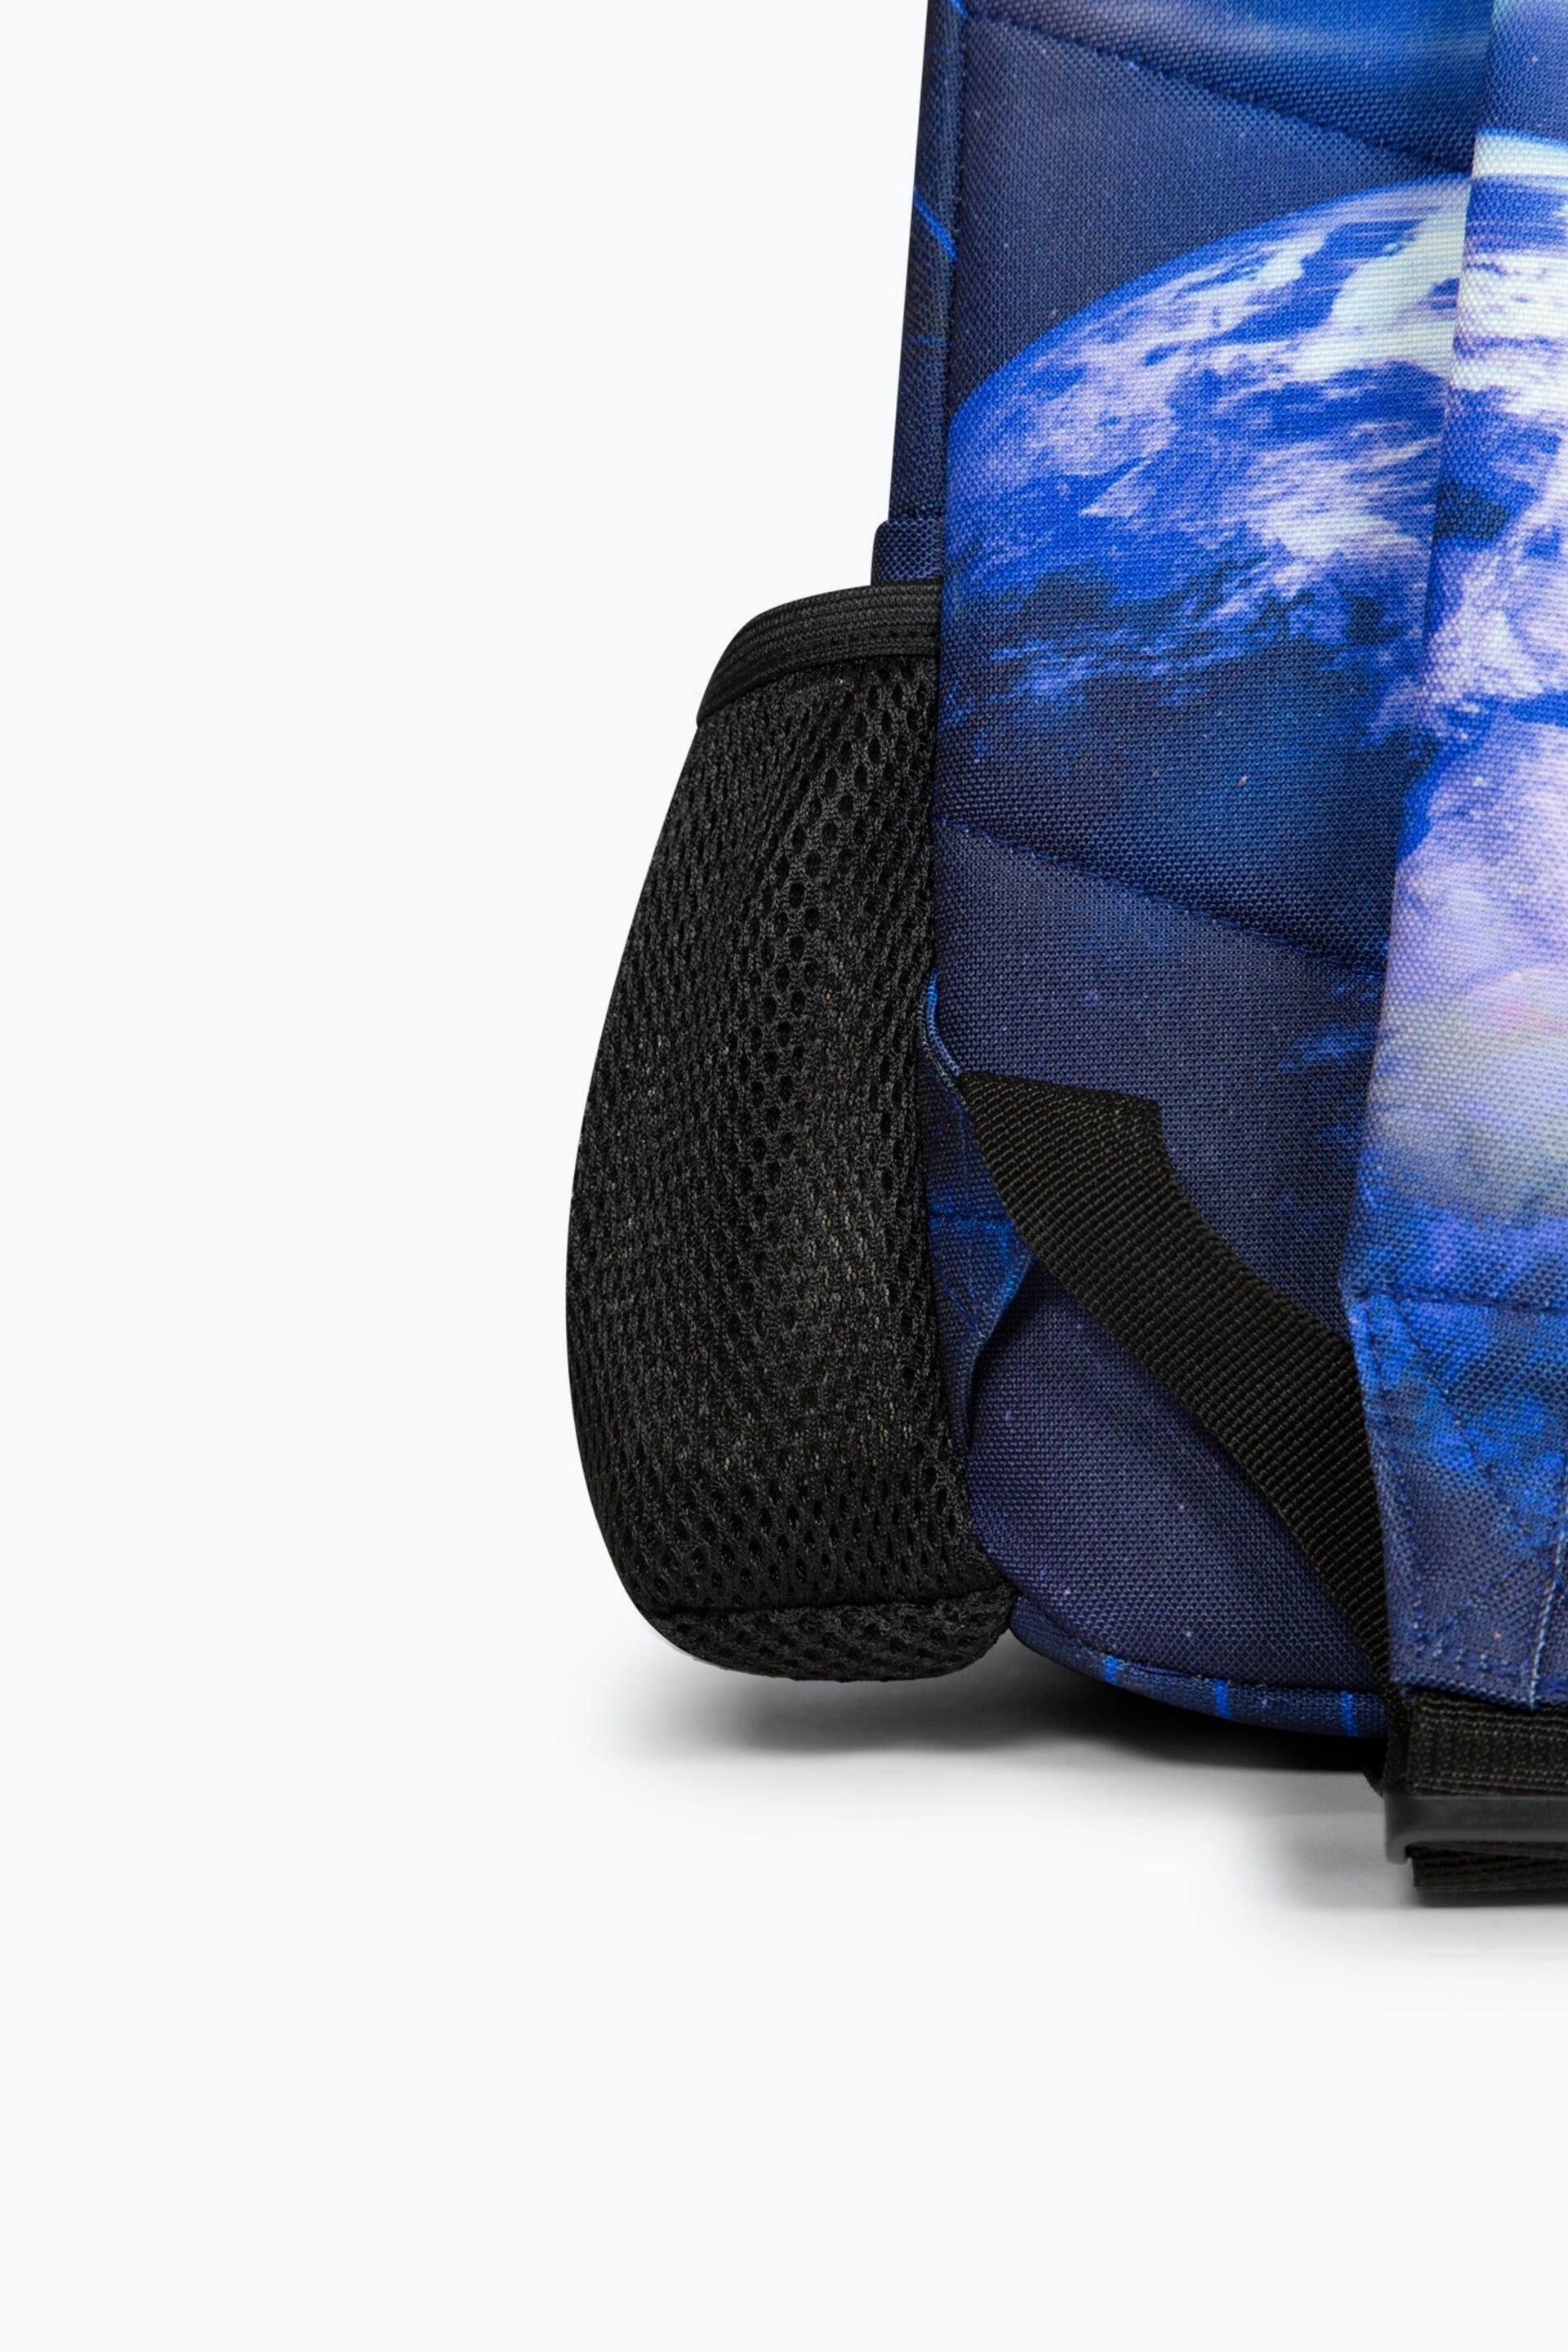 Hype. Space Storm V2 Badge Backpack - Image 7 of 10